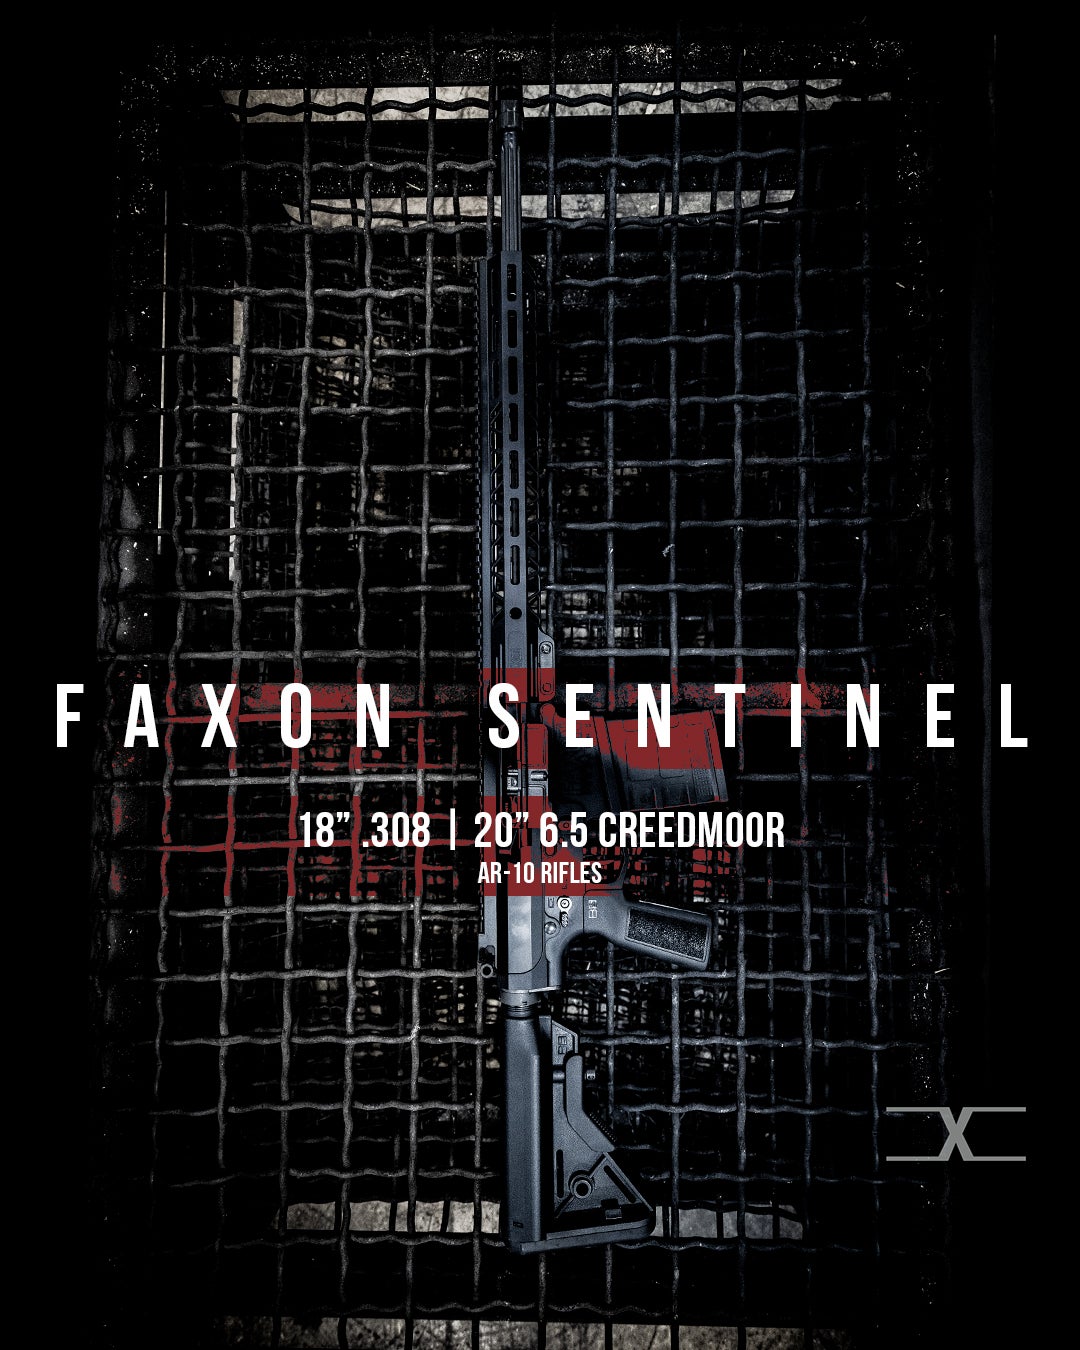 New Faxon Sentinel .308 and 6.5 Creedmoor Rifles Available for Preorder